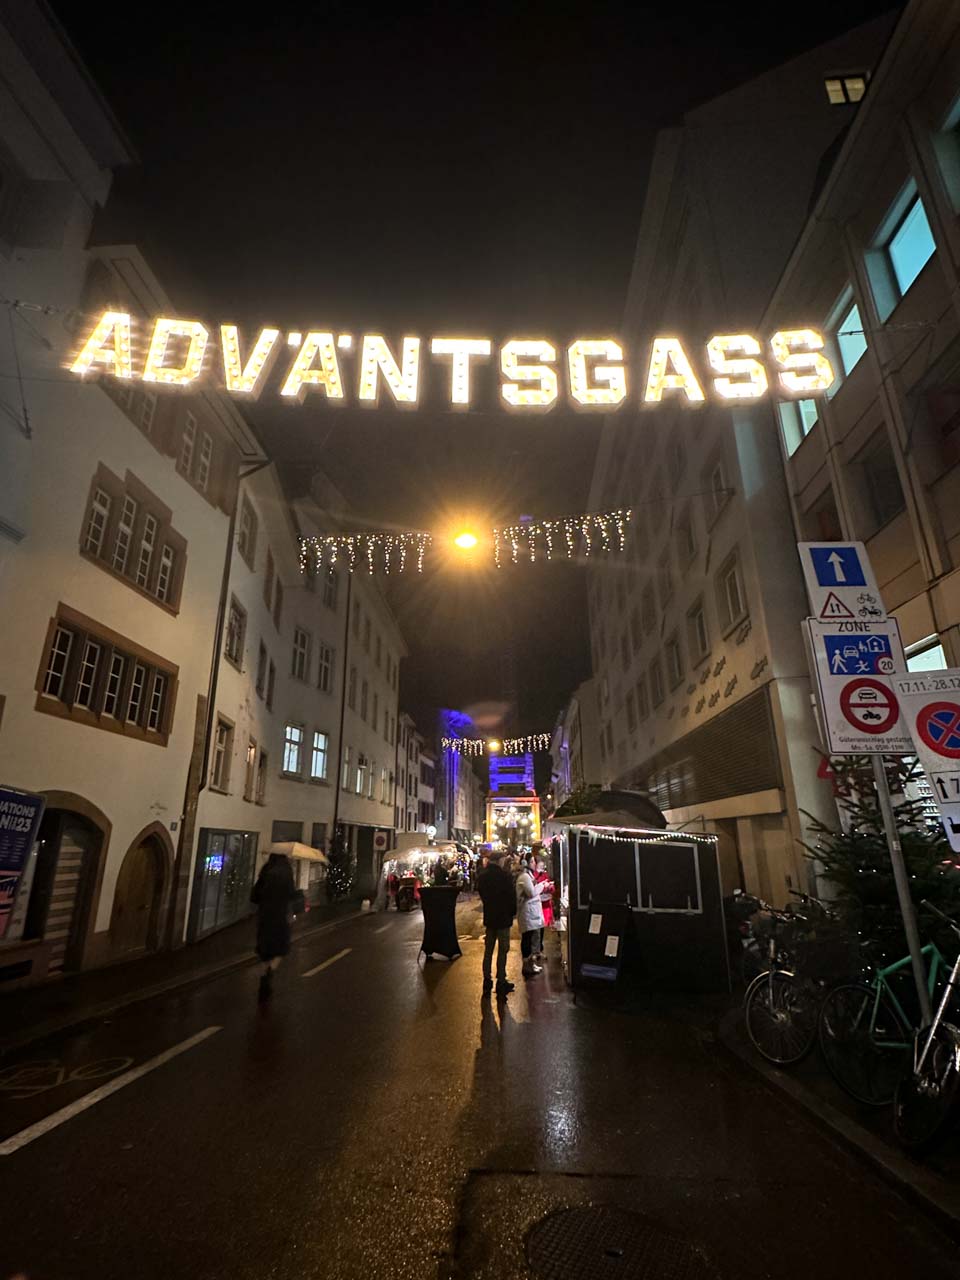 Rheingasse street in Basel during the Christmas season with 'ADVANTSGASS' lit up above and festive decorations